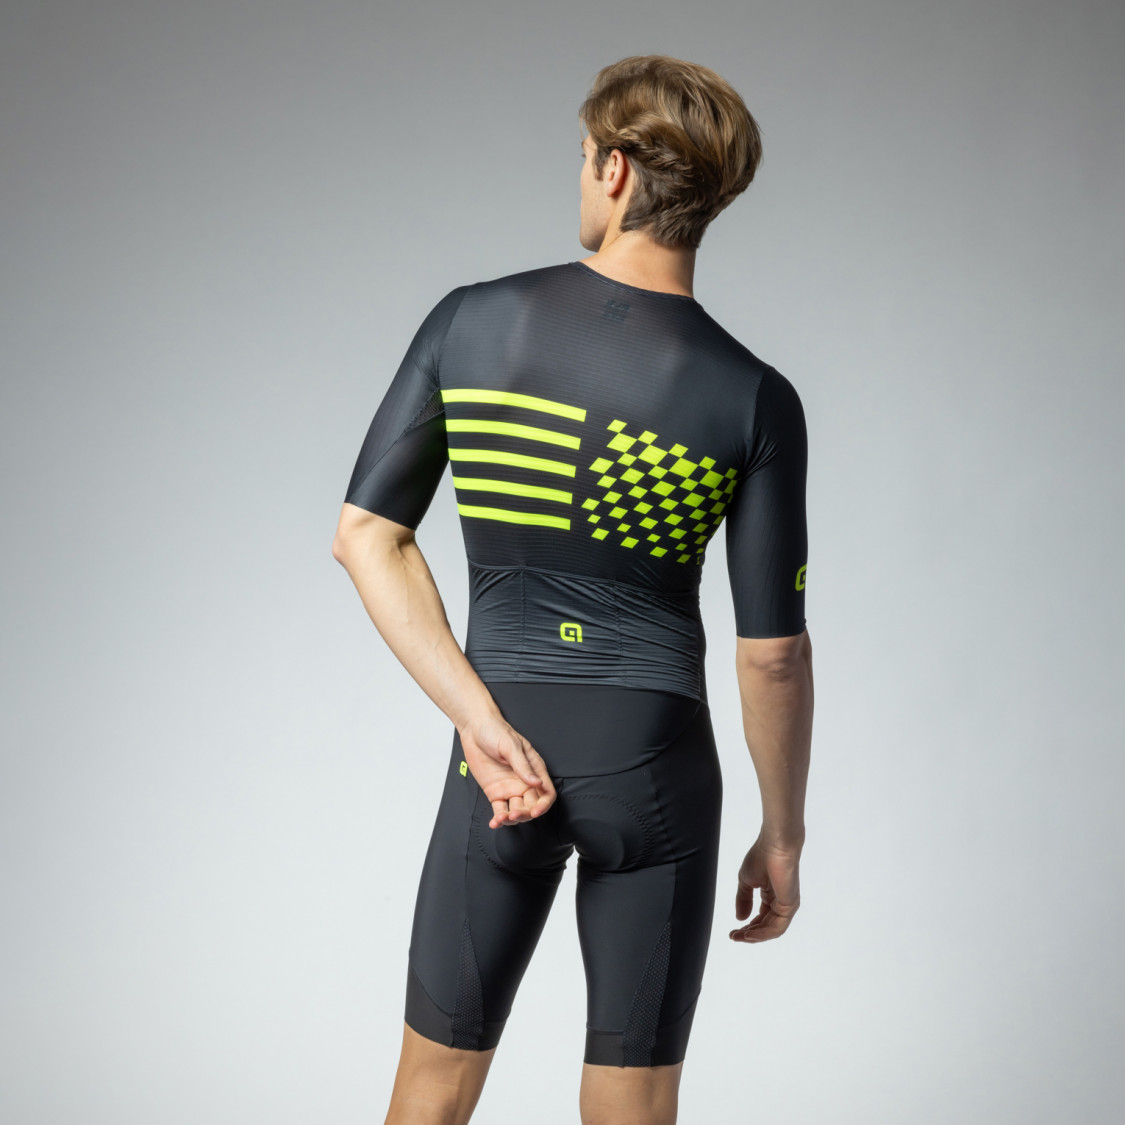 Cycling skinsuits for men | Alé Cycling